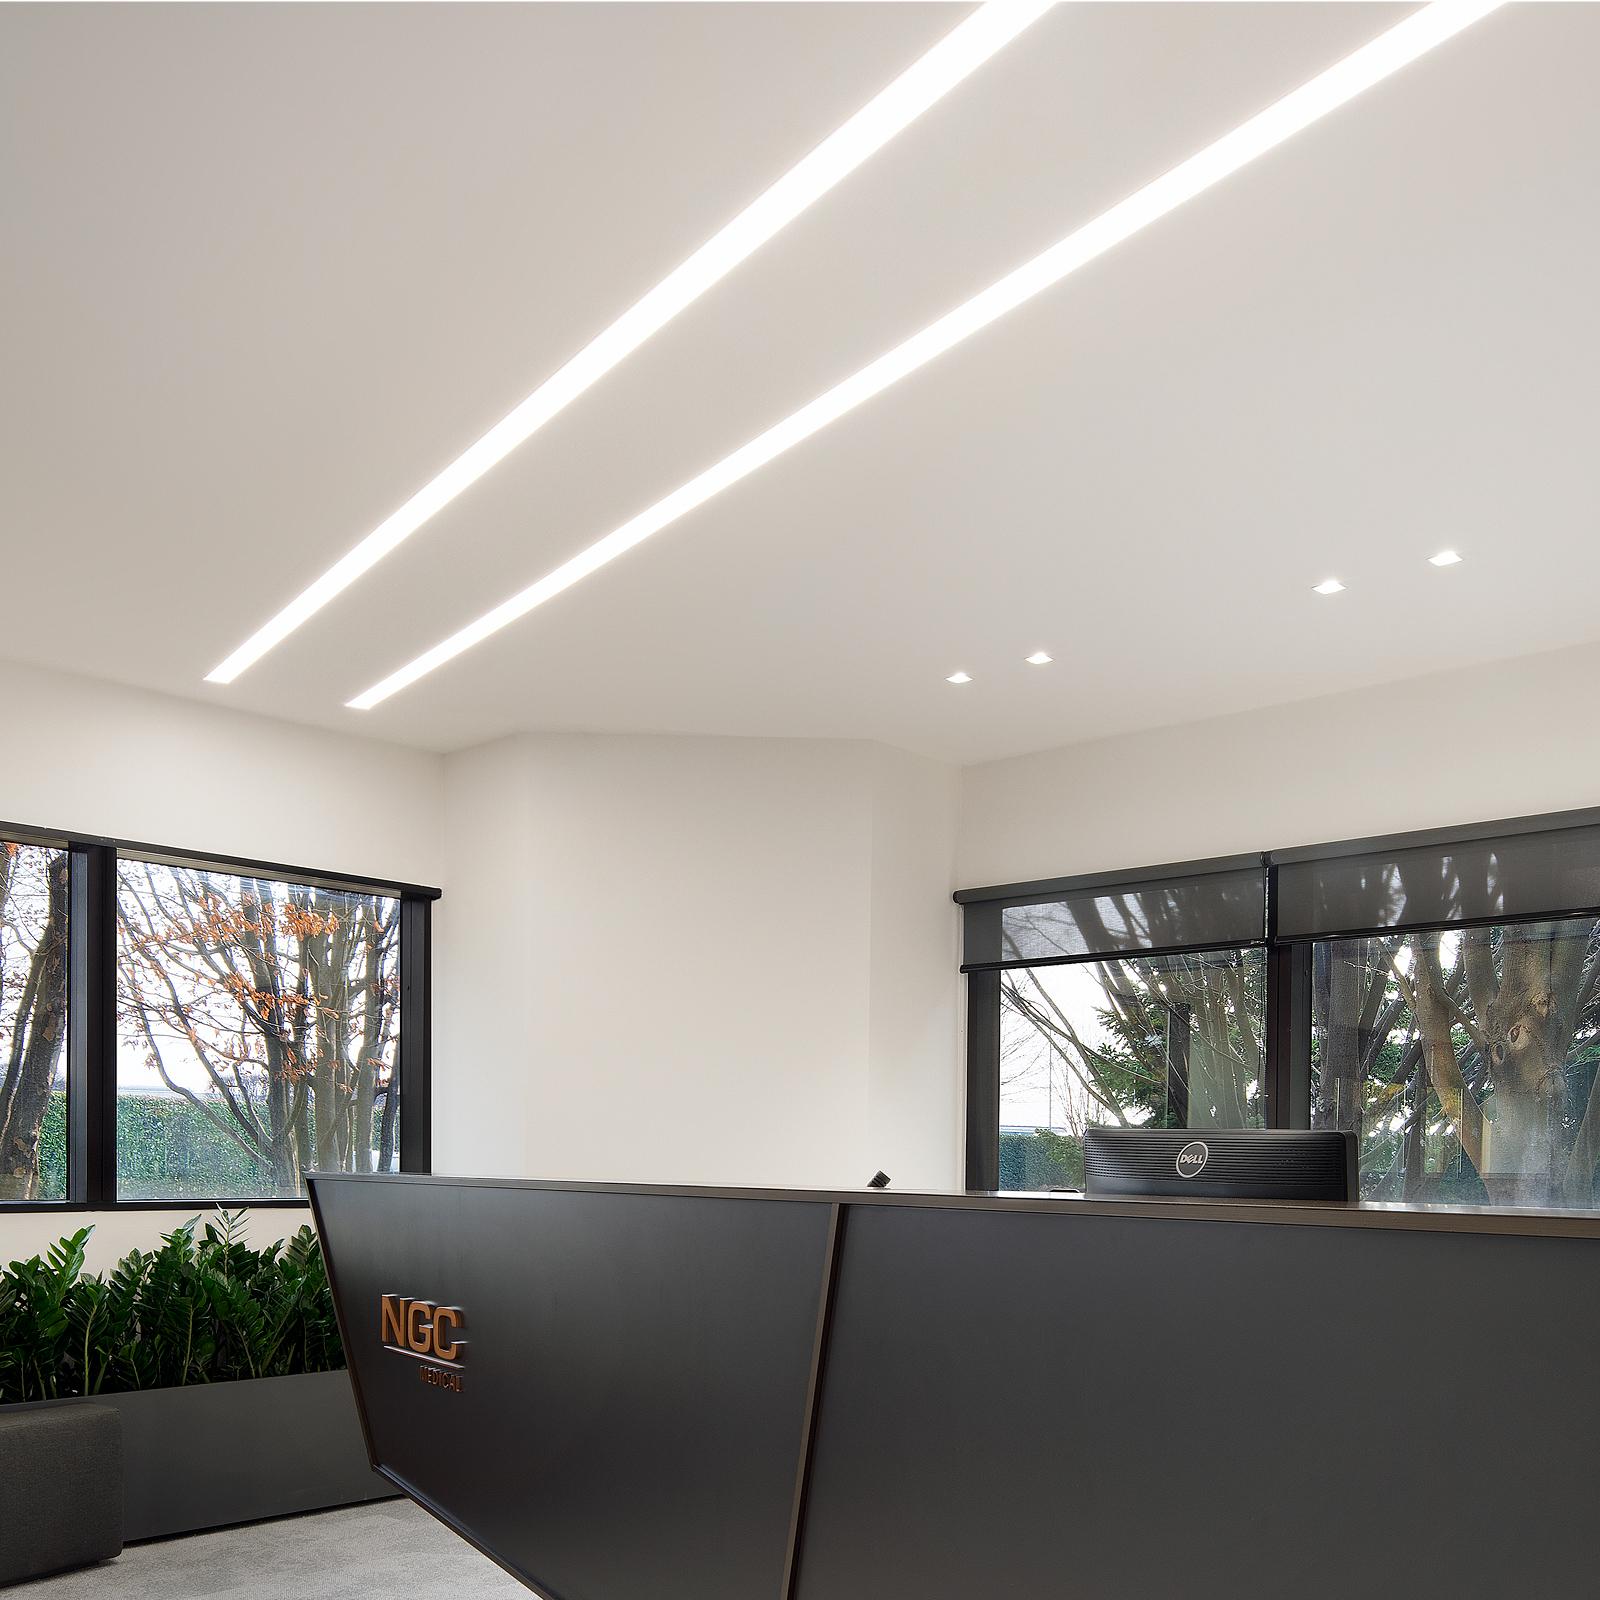 Gallery Rollip Linear Light System Linealightgroup 1200X1200 10 (3)